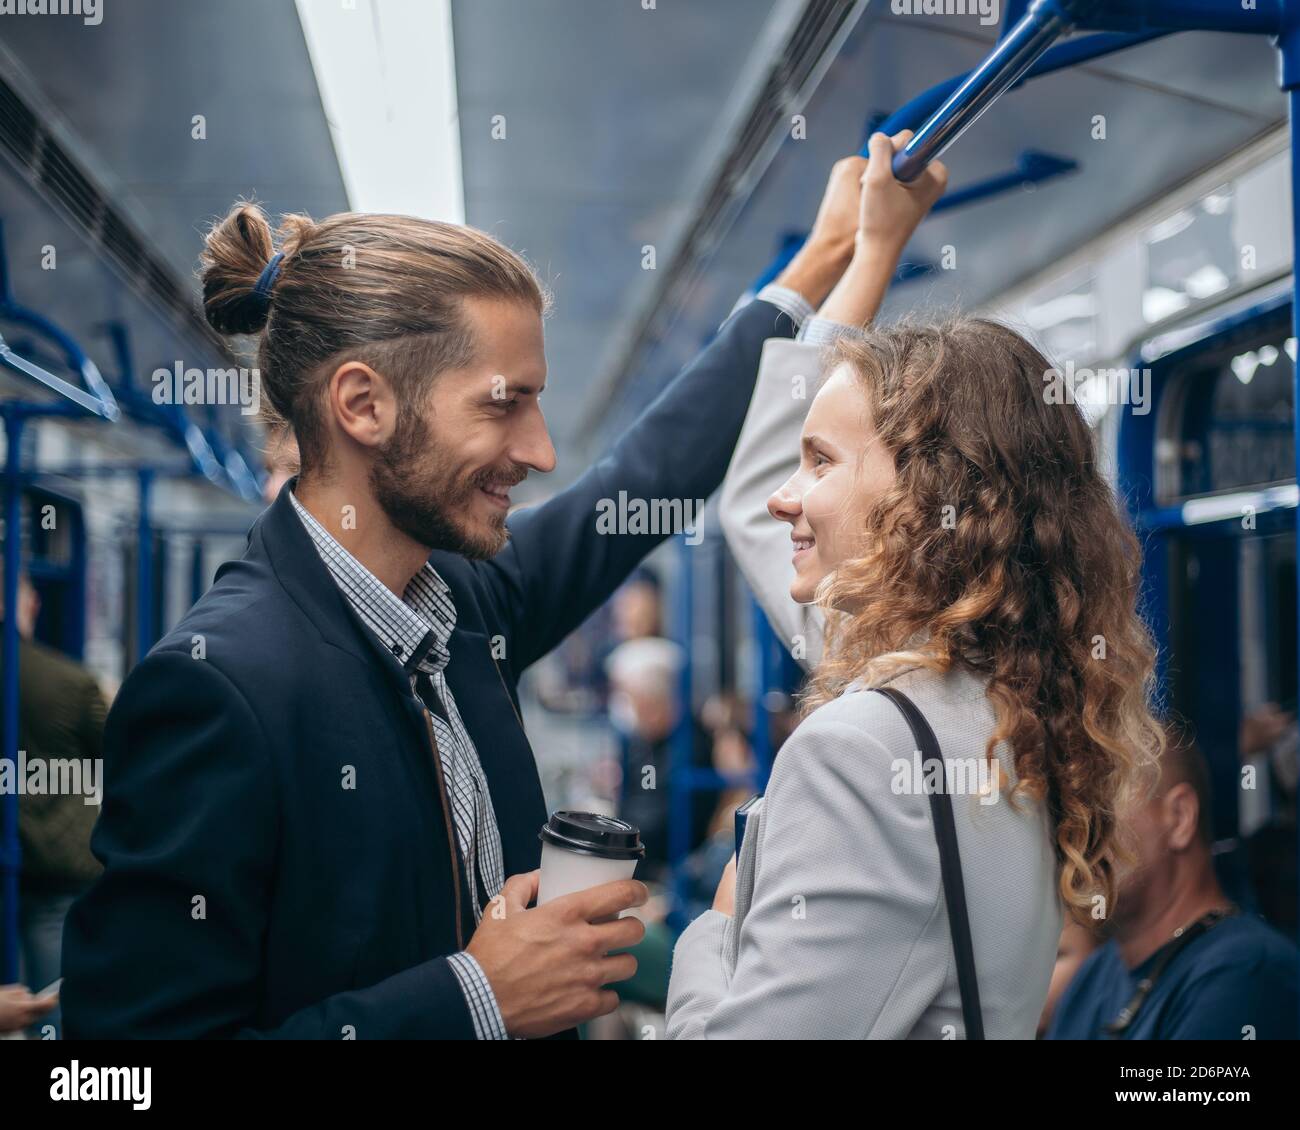 man and woman in love looking at each other on a subway train. Stock Photo